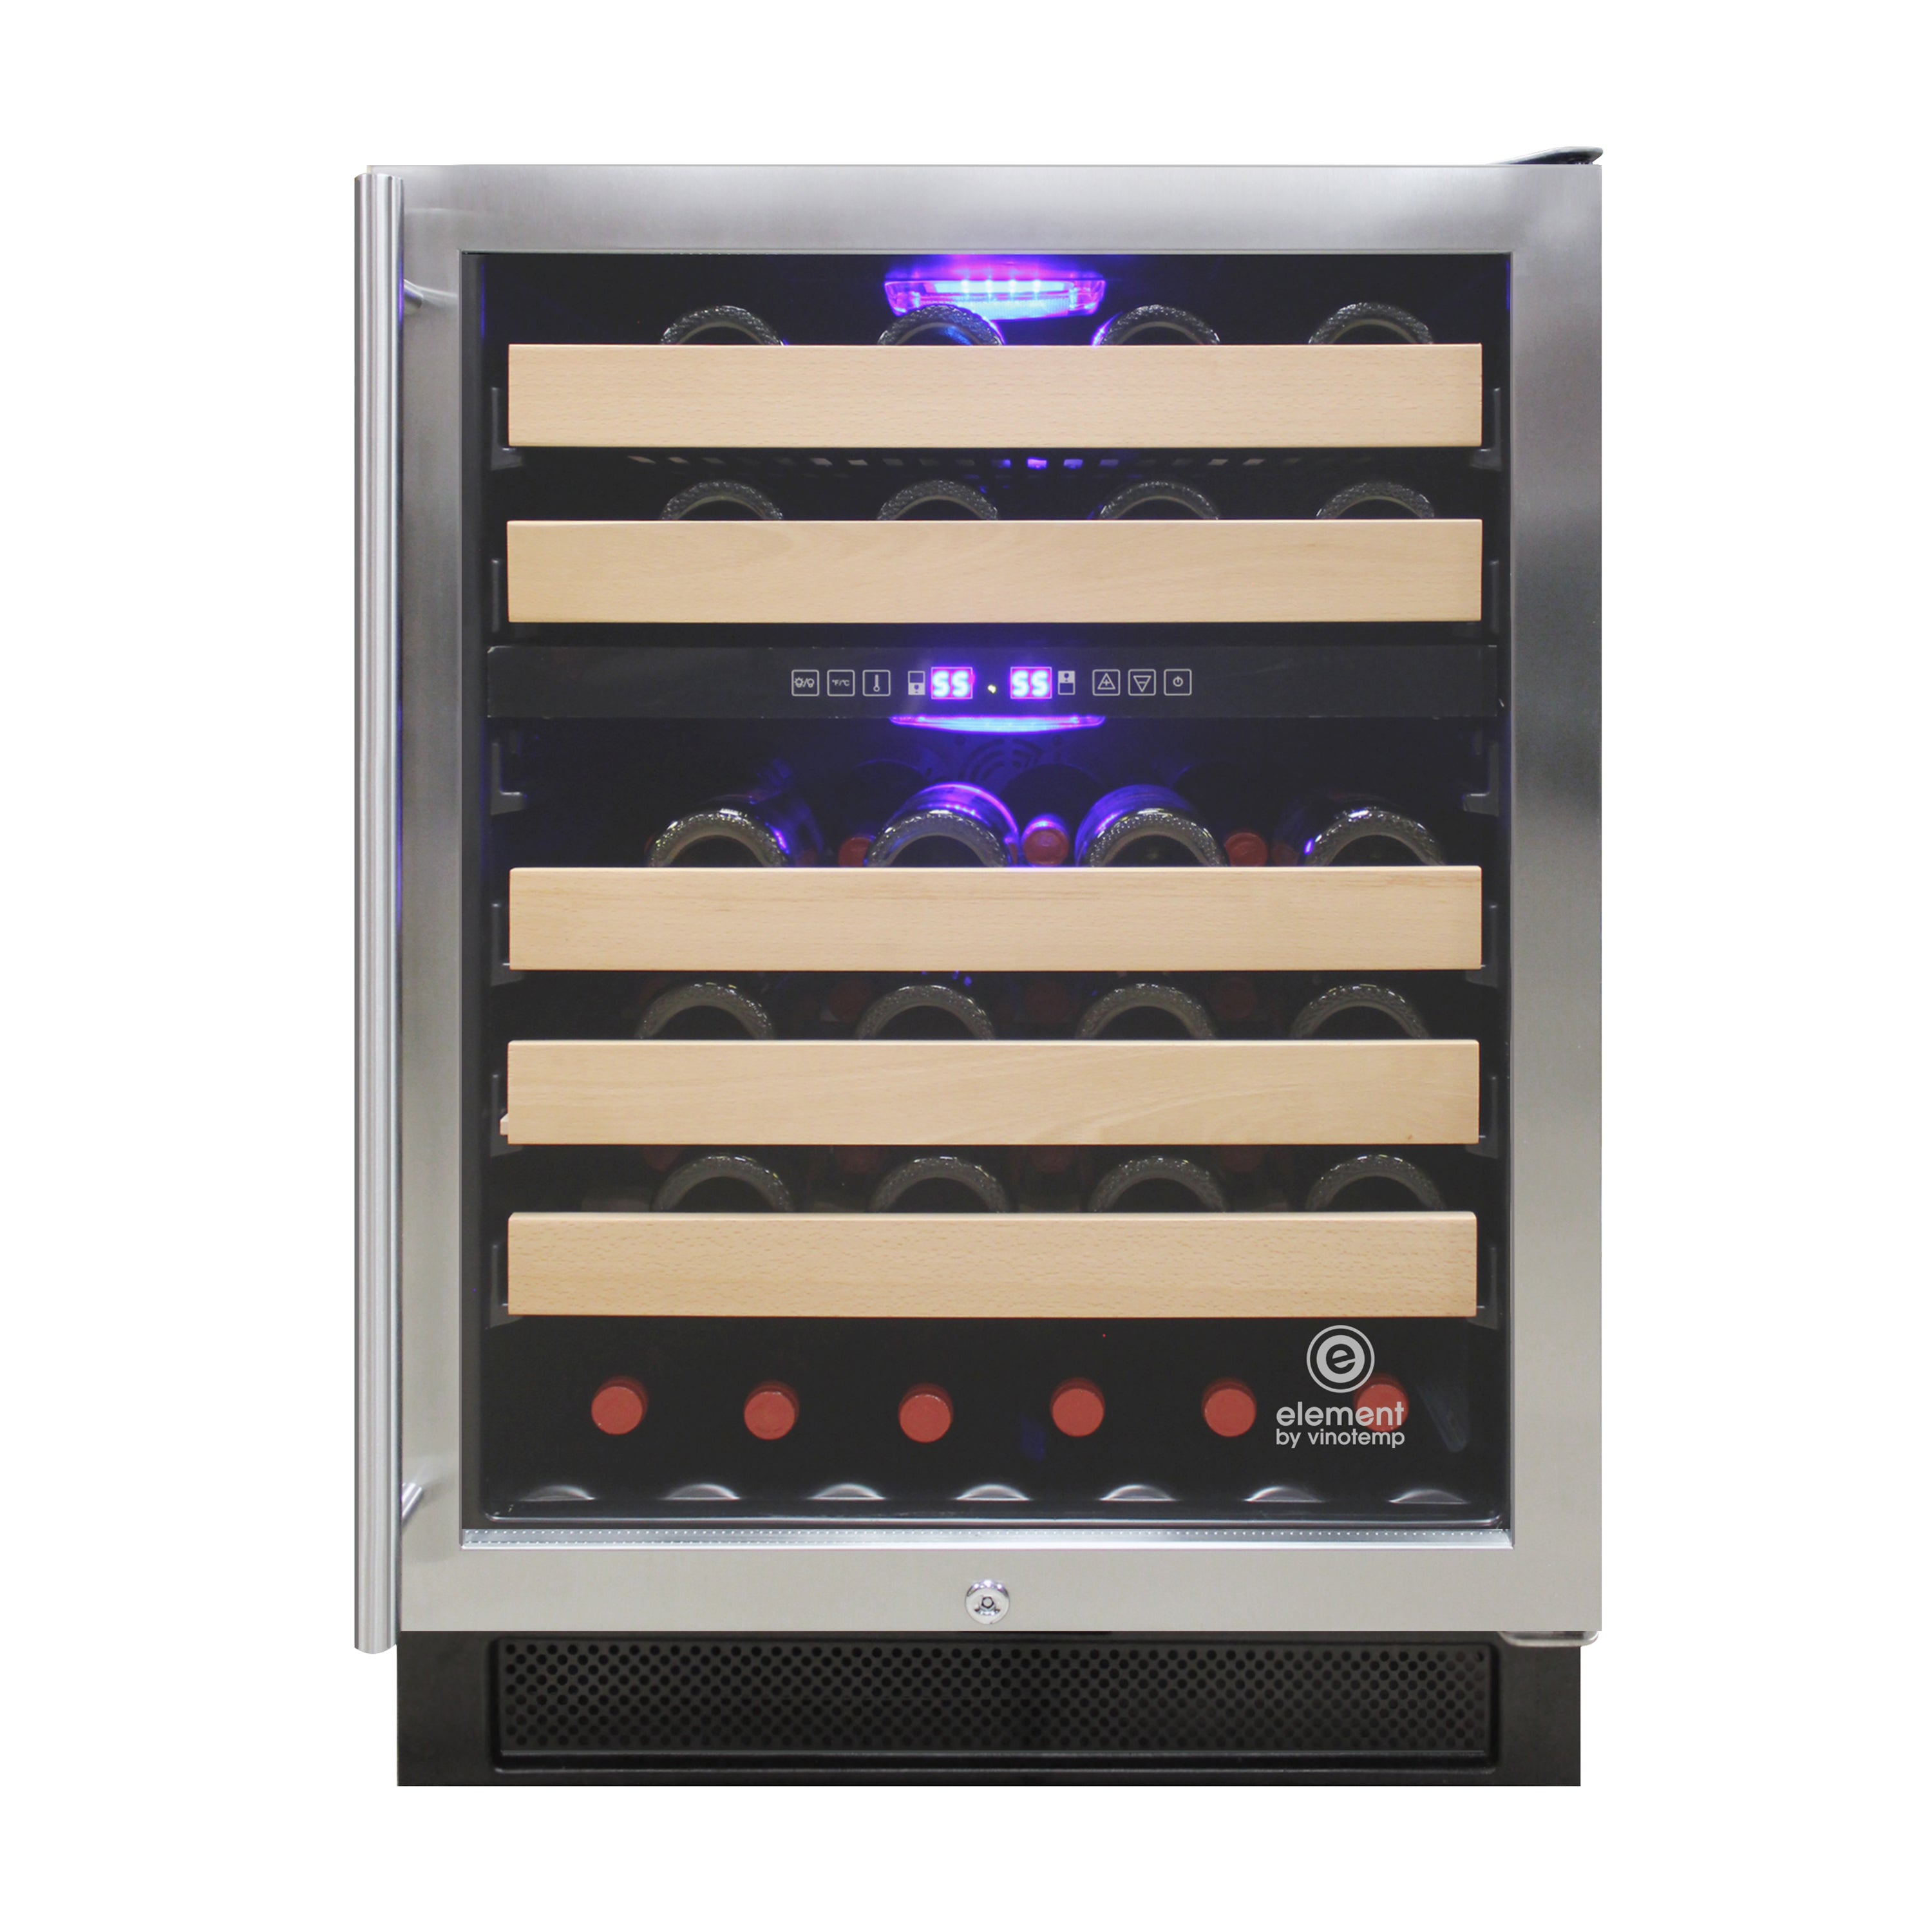 Vinotemp - EL-46WCST, Vinotemp Connoisseur Series 46 Dual-Zone Wine Cooler, Right Hinge, 46 Bottle Capacity, in Stainless Steel